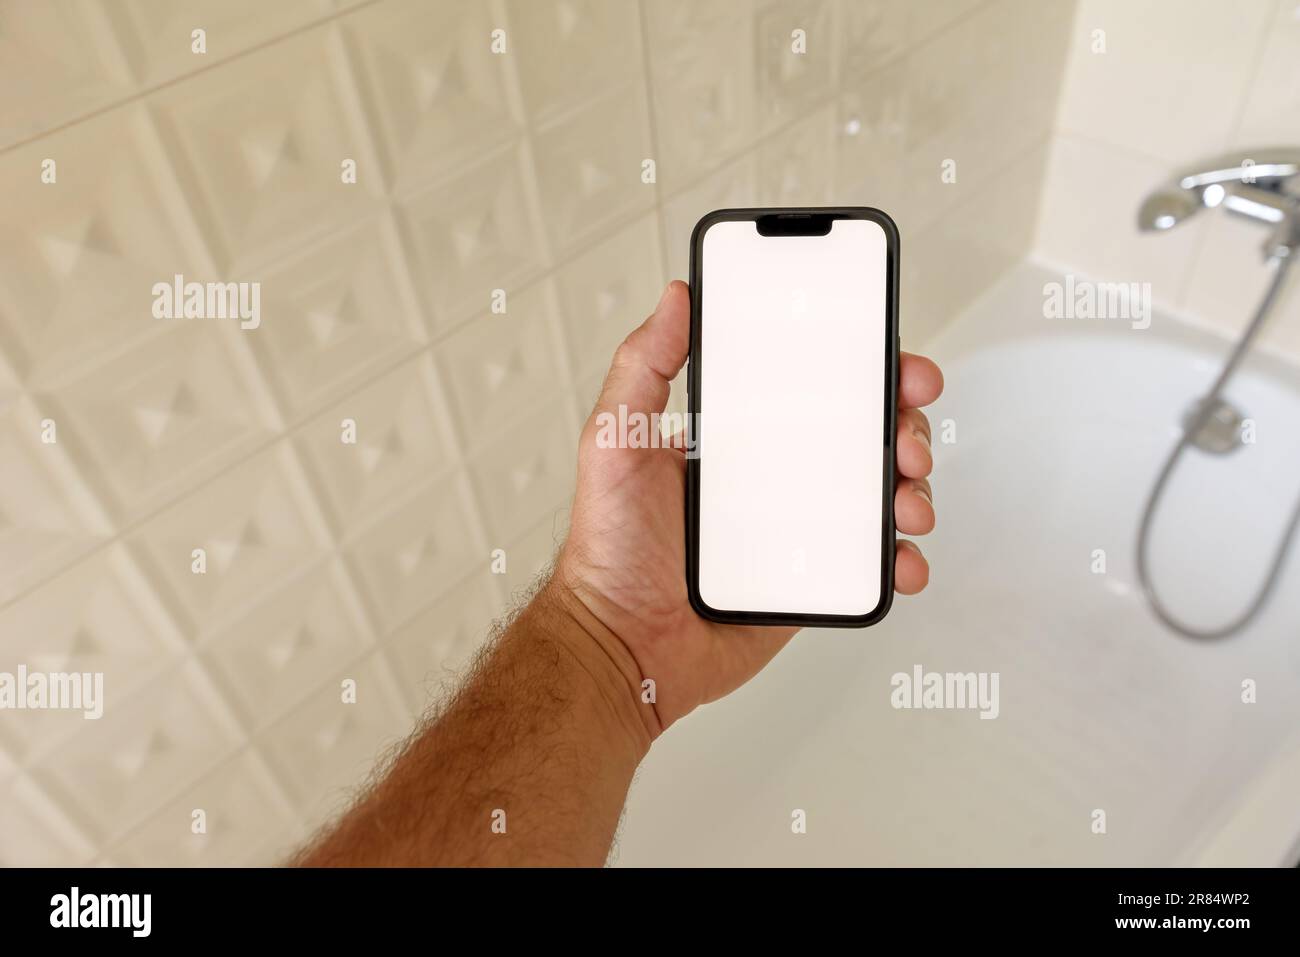 Smartphone mockup in bathroom, man holding mobile phone with blank touch screen over the bathtub, selective focus Stock Photo